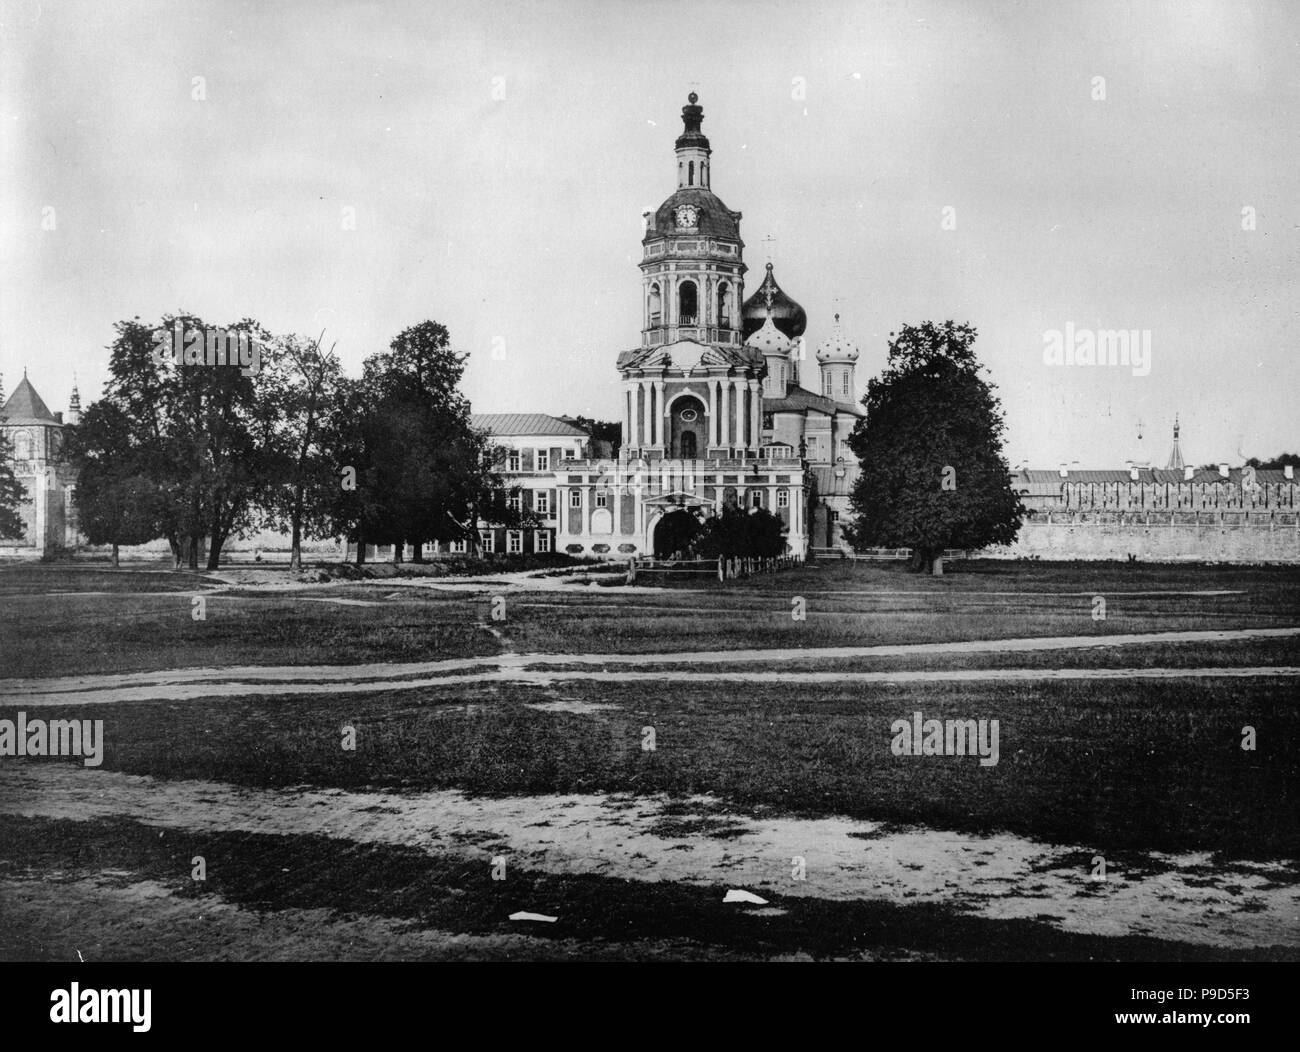 The Donskoy Monastery in Moscow. Museum: Russian State Film and Photo Archive, Krasnogorsk. Stock Photo